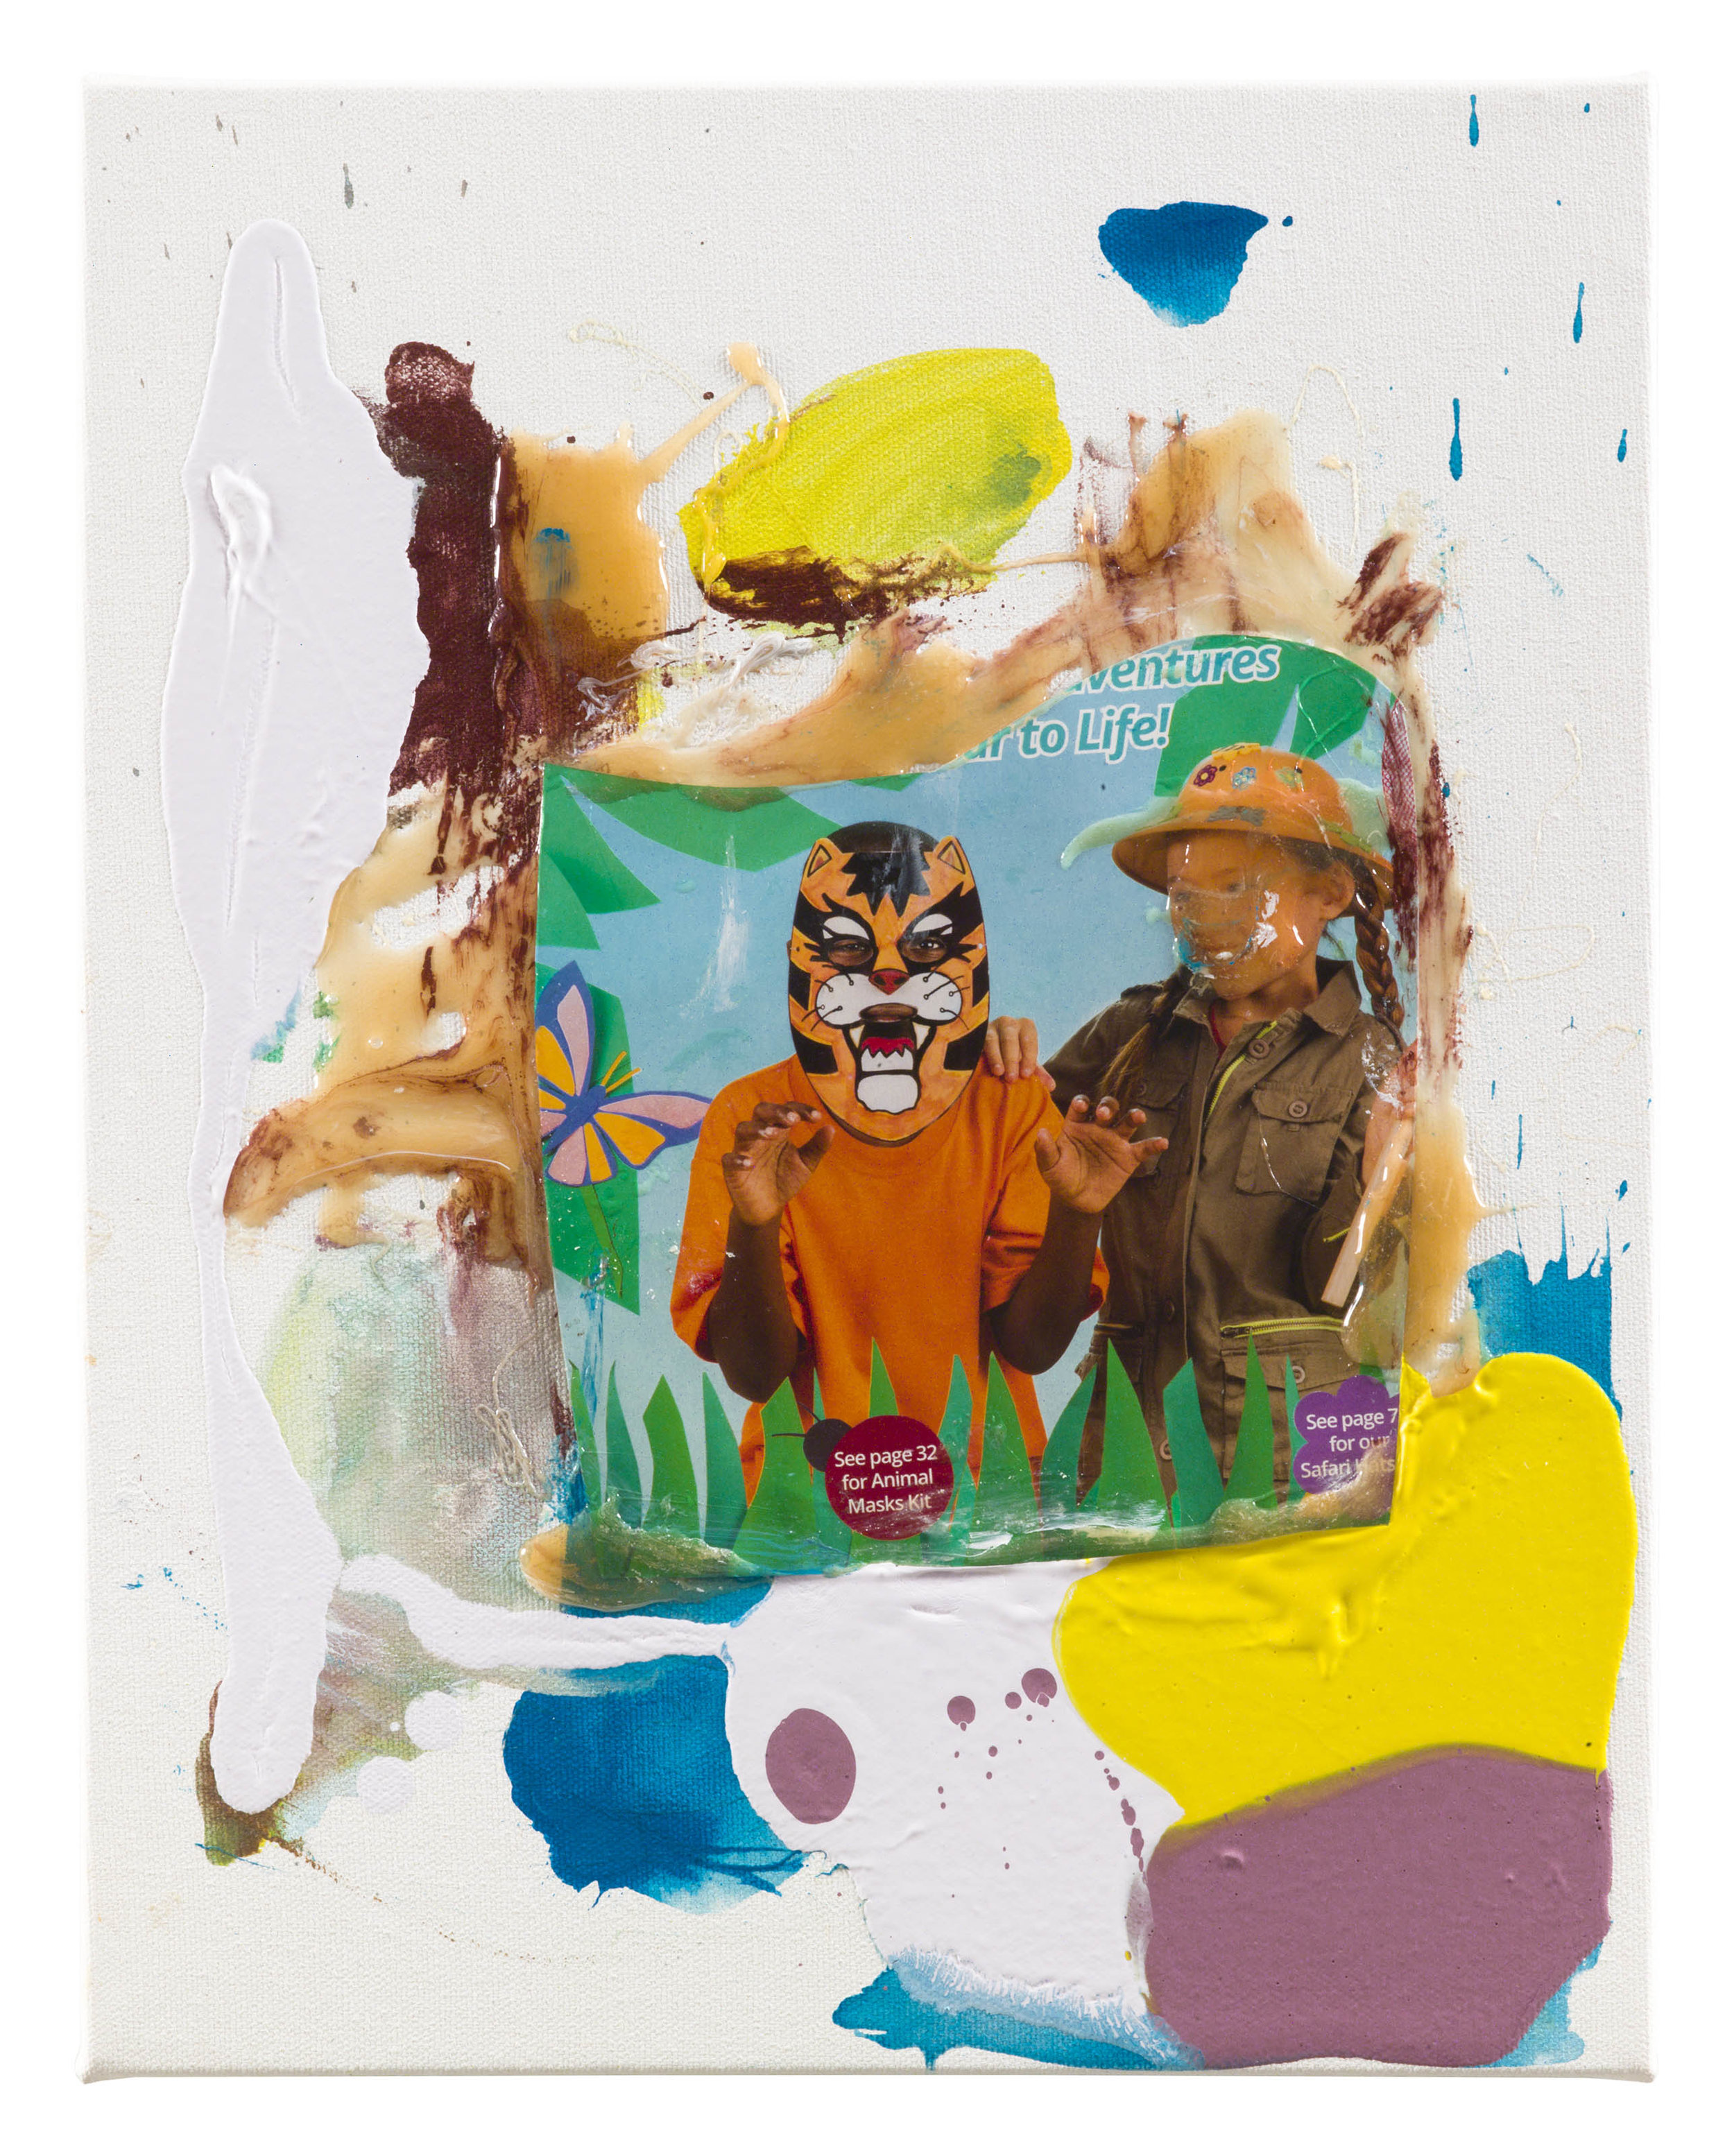  Drew Beattie  Girl with Tiger   2018 acrylic, resin and collage on canvas 14 x 11 inches 